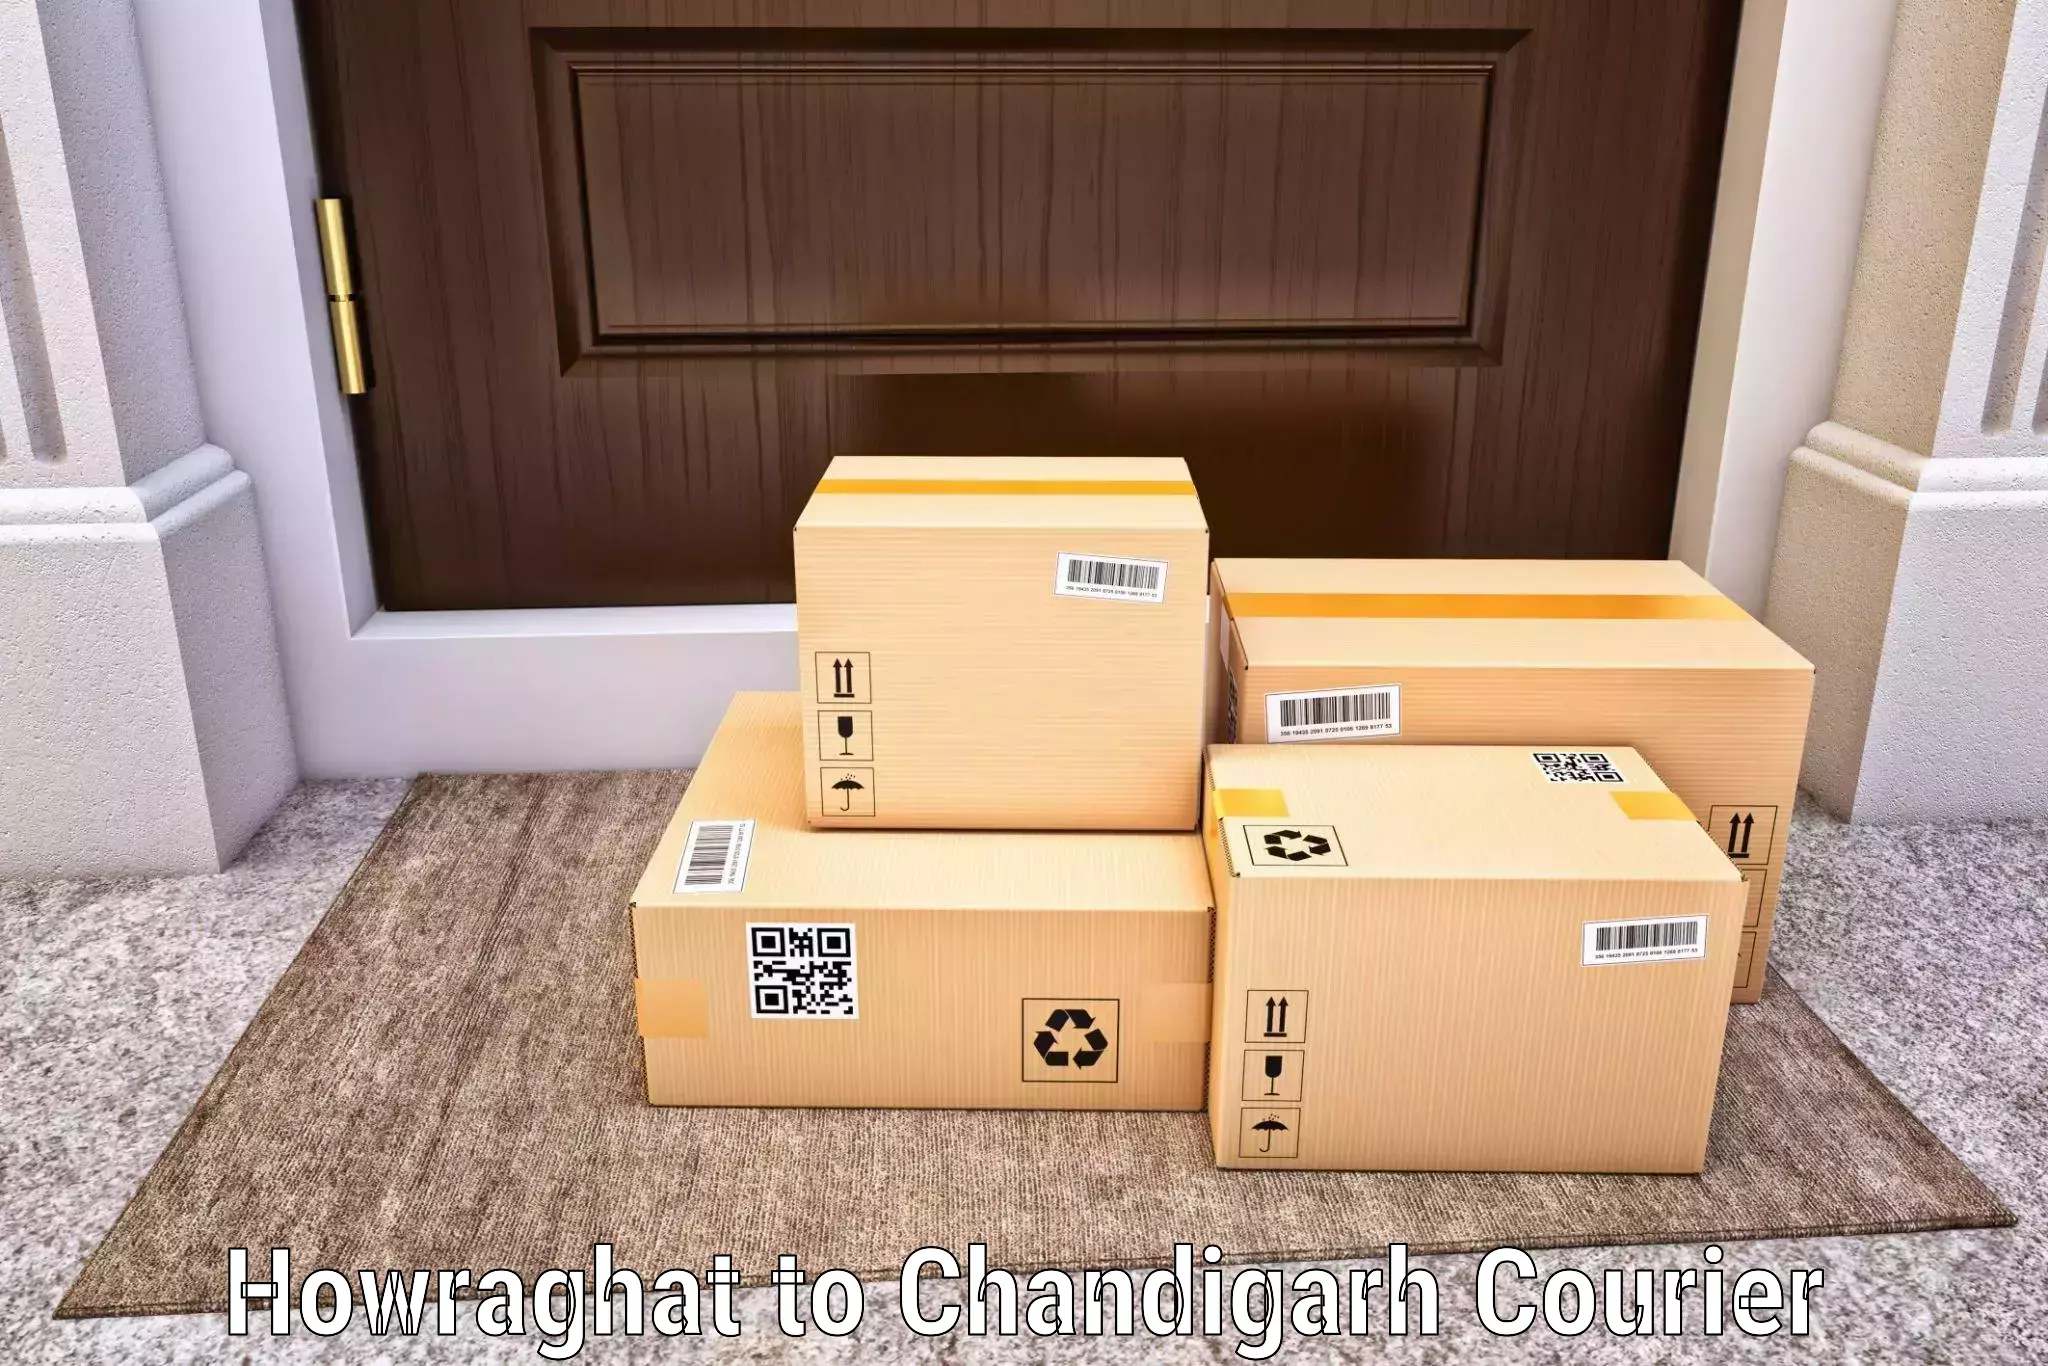 Efficient parcel service Howraghat to Chandigarh